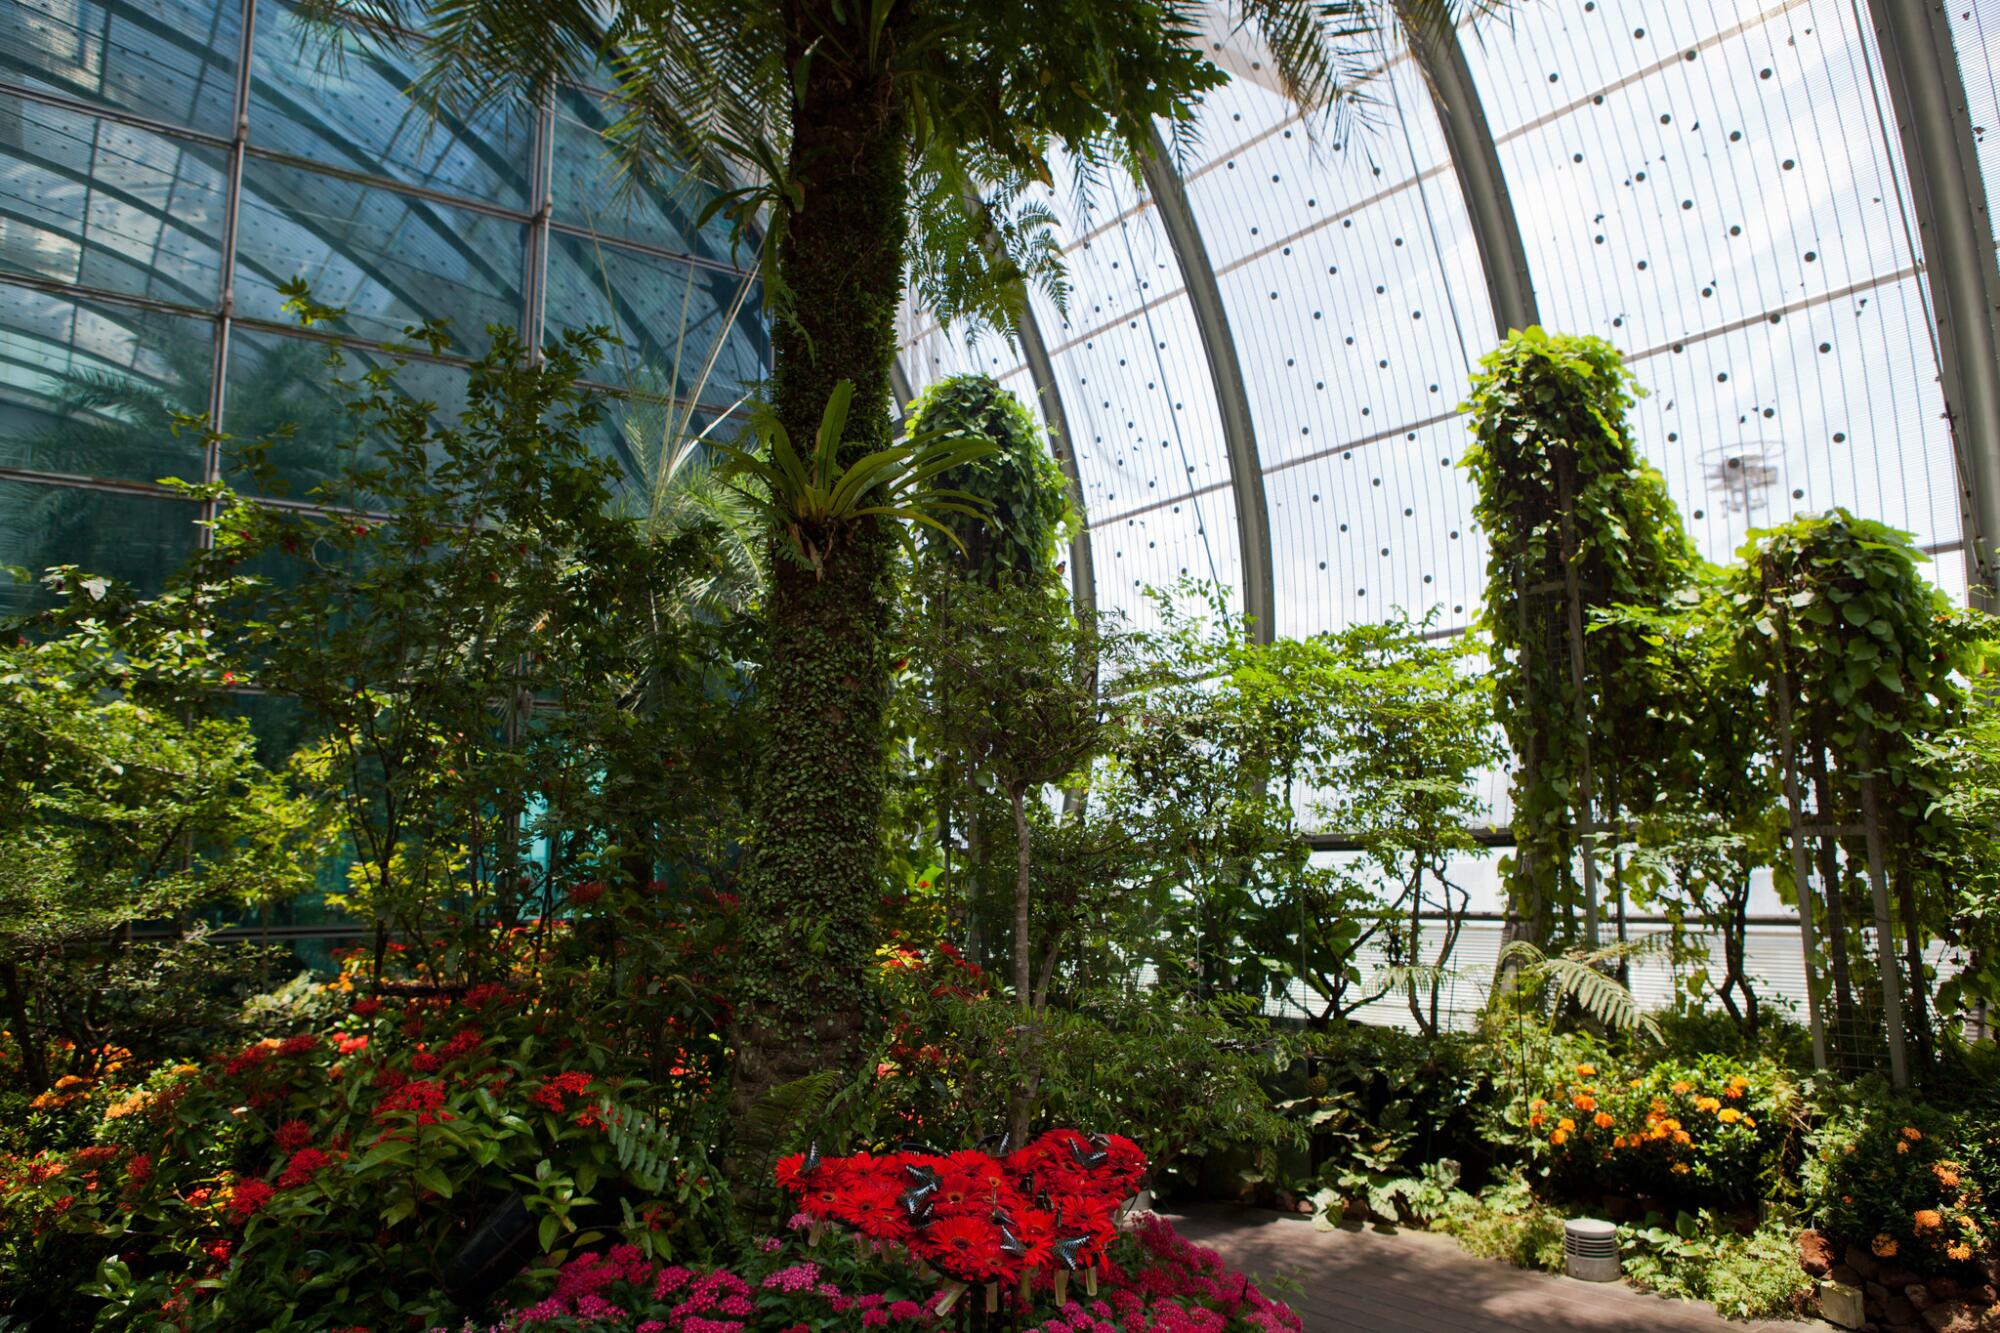 Singapore's Changi Airport butterfly garden is designed to be a tropical nature retreat for passengers.